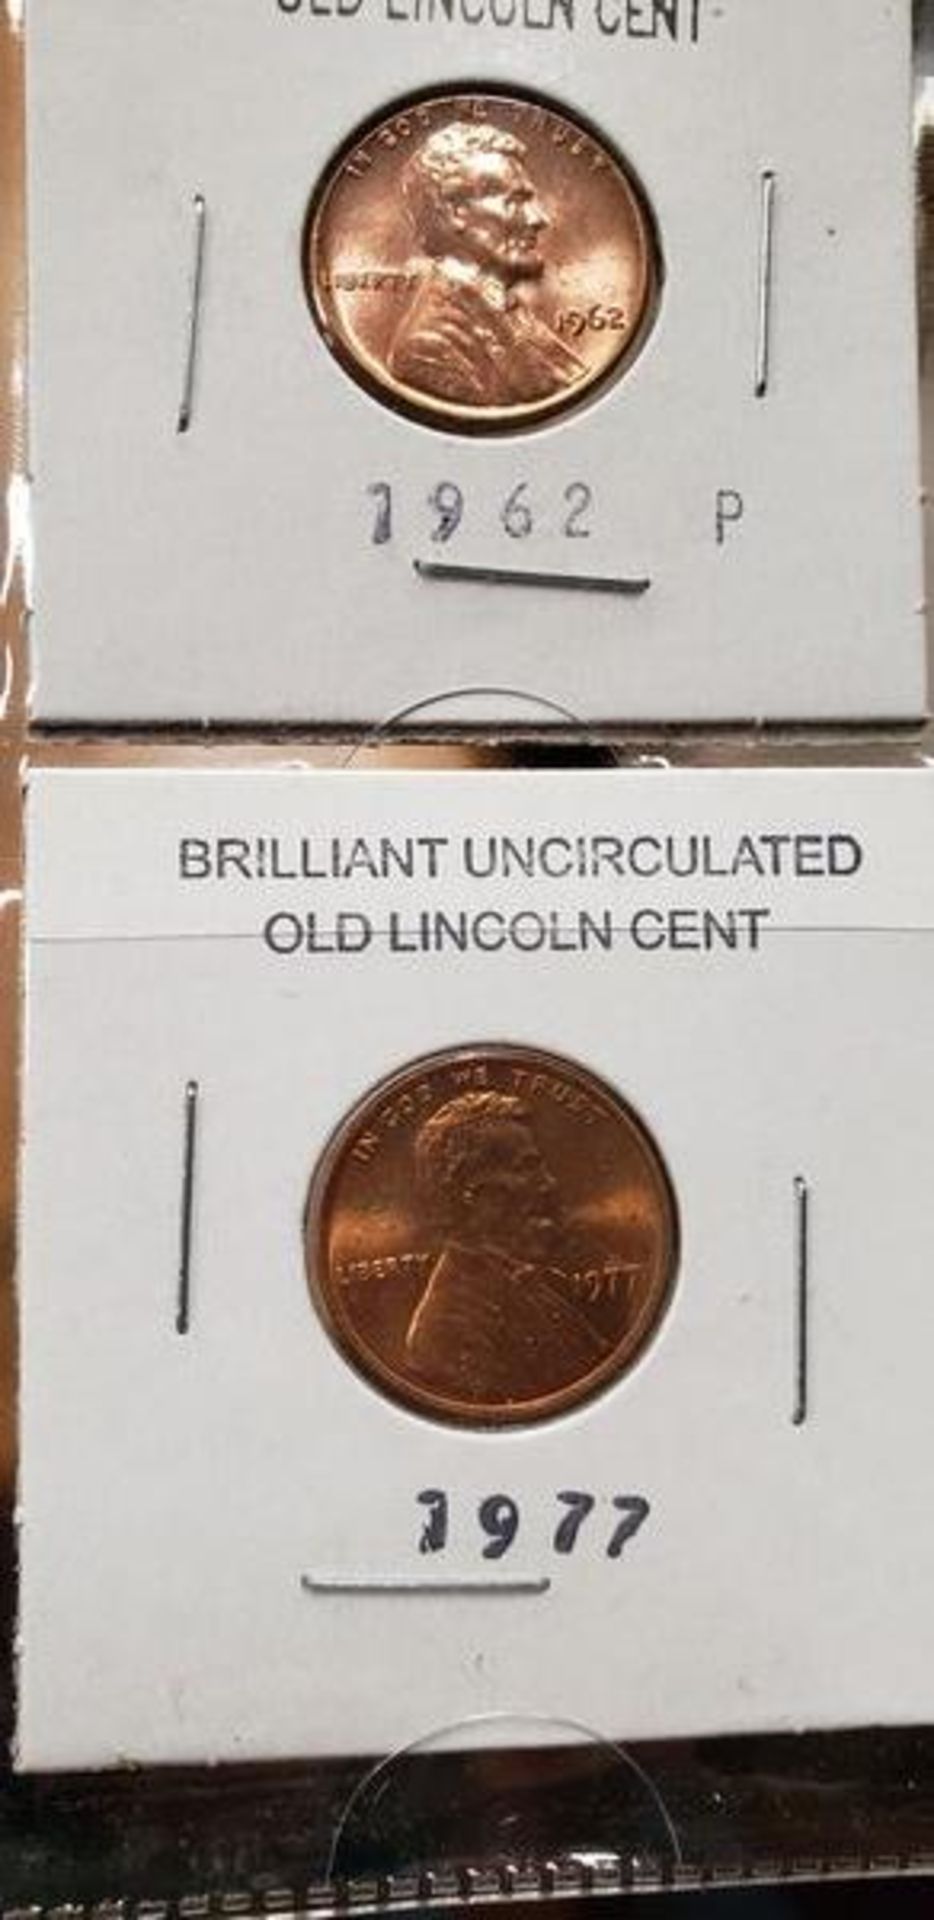 LOT OF 8 BRILLIANT UNCIRCULATED OLD LINCOLN CENTS - Image 3 of 9